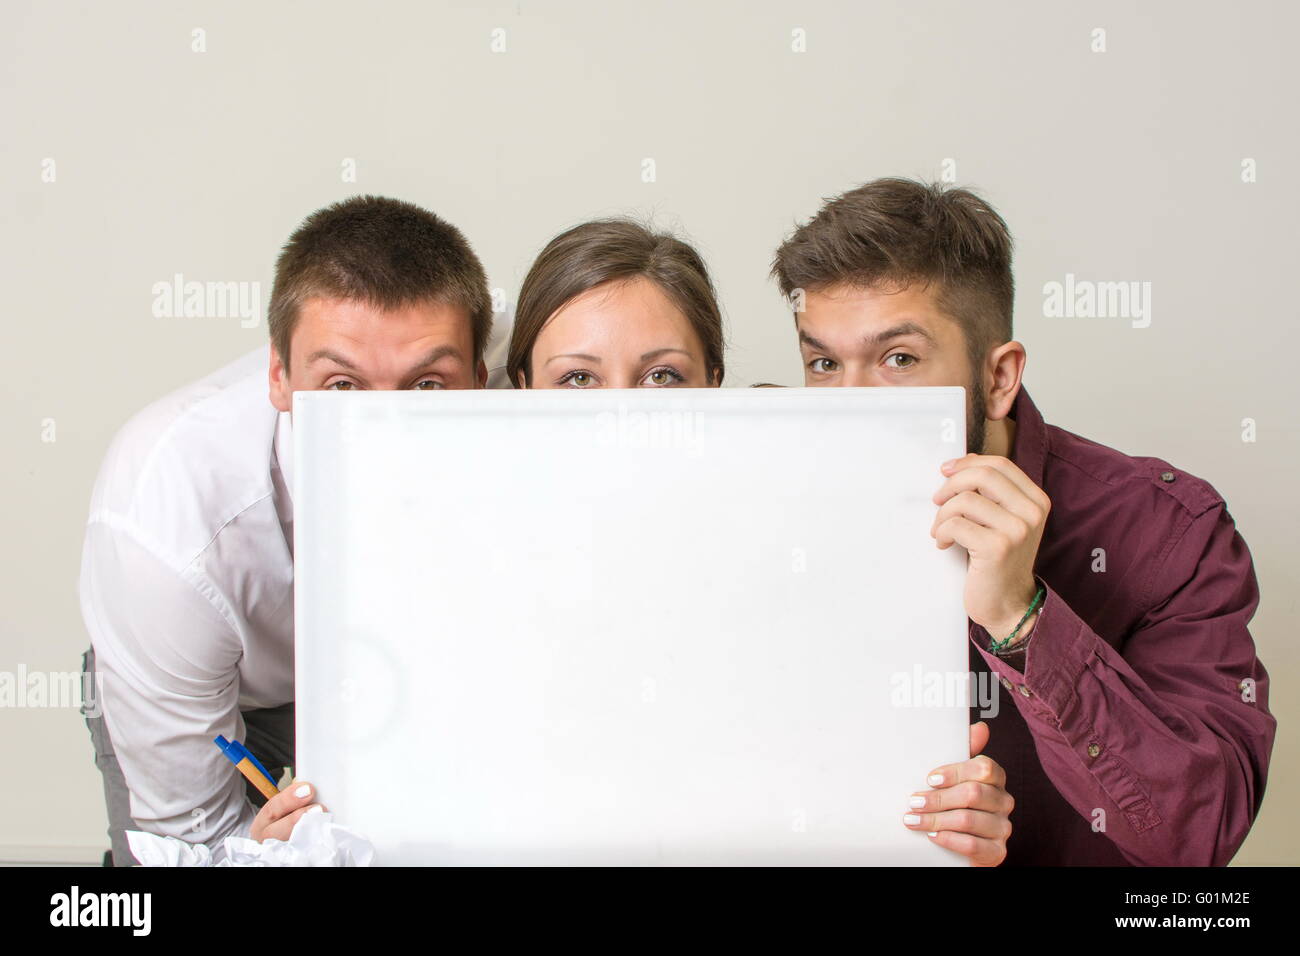 Our new project. Team hiding behind white board Stock Photo